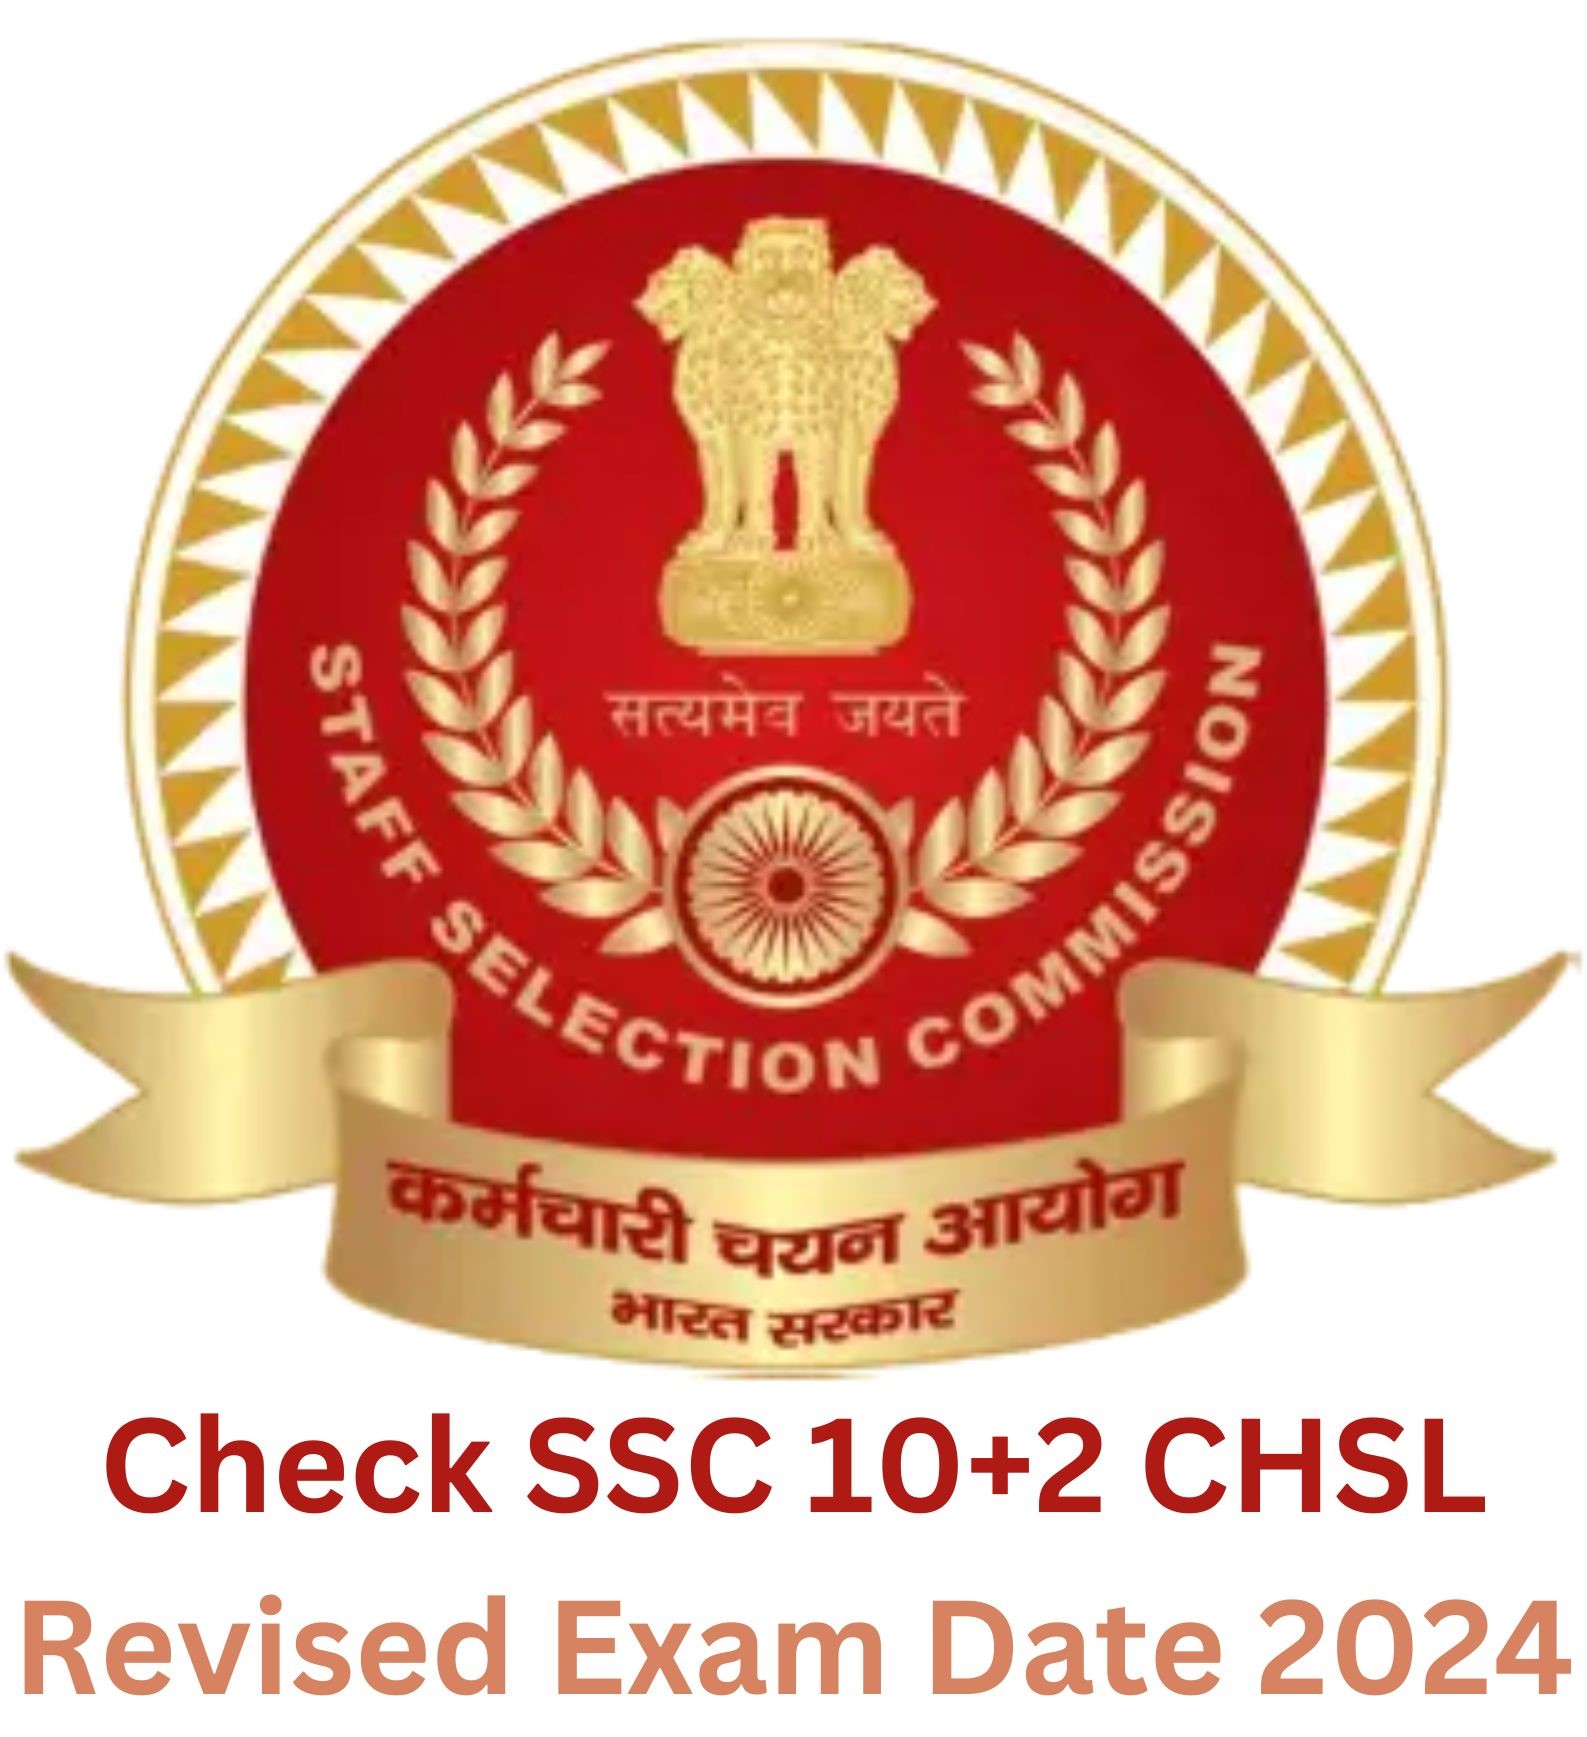 Check SSC 10+2 CHSL Revised Exam Date 2024